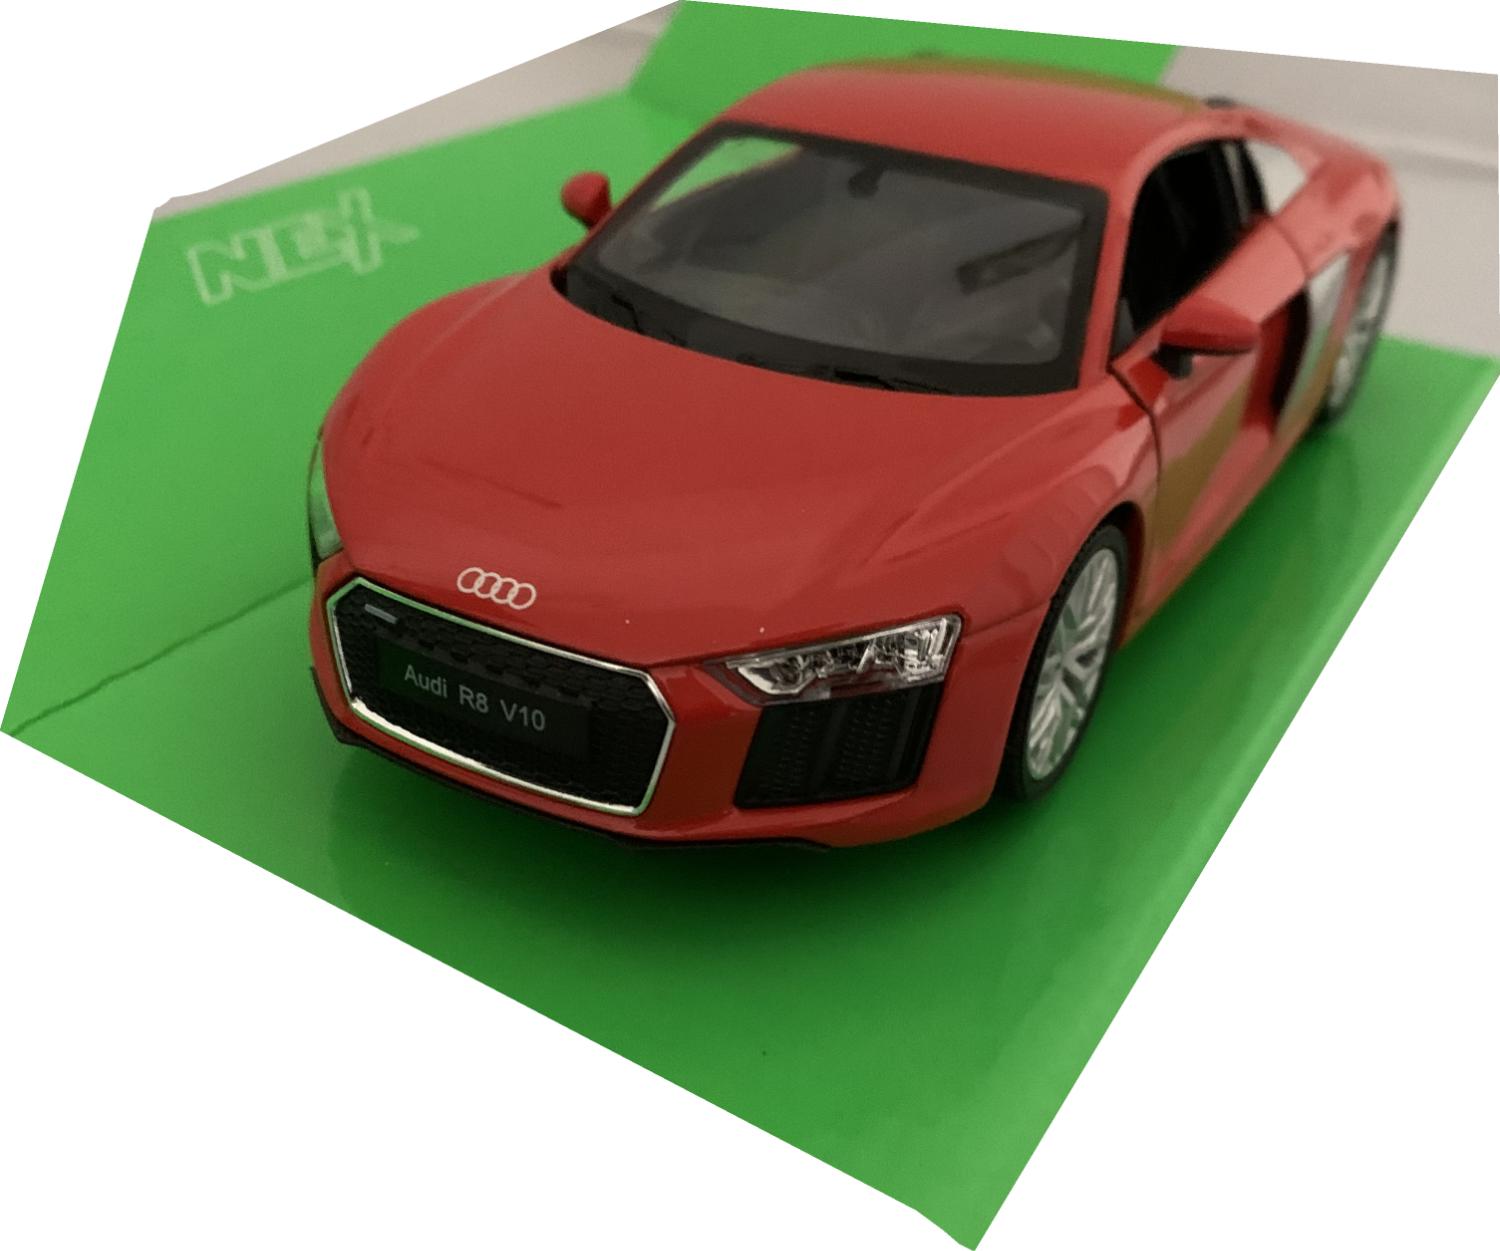 Audi R8 V10 2016 in Red, 1:24 scale model from Welly